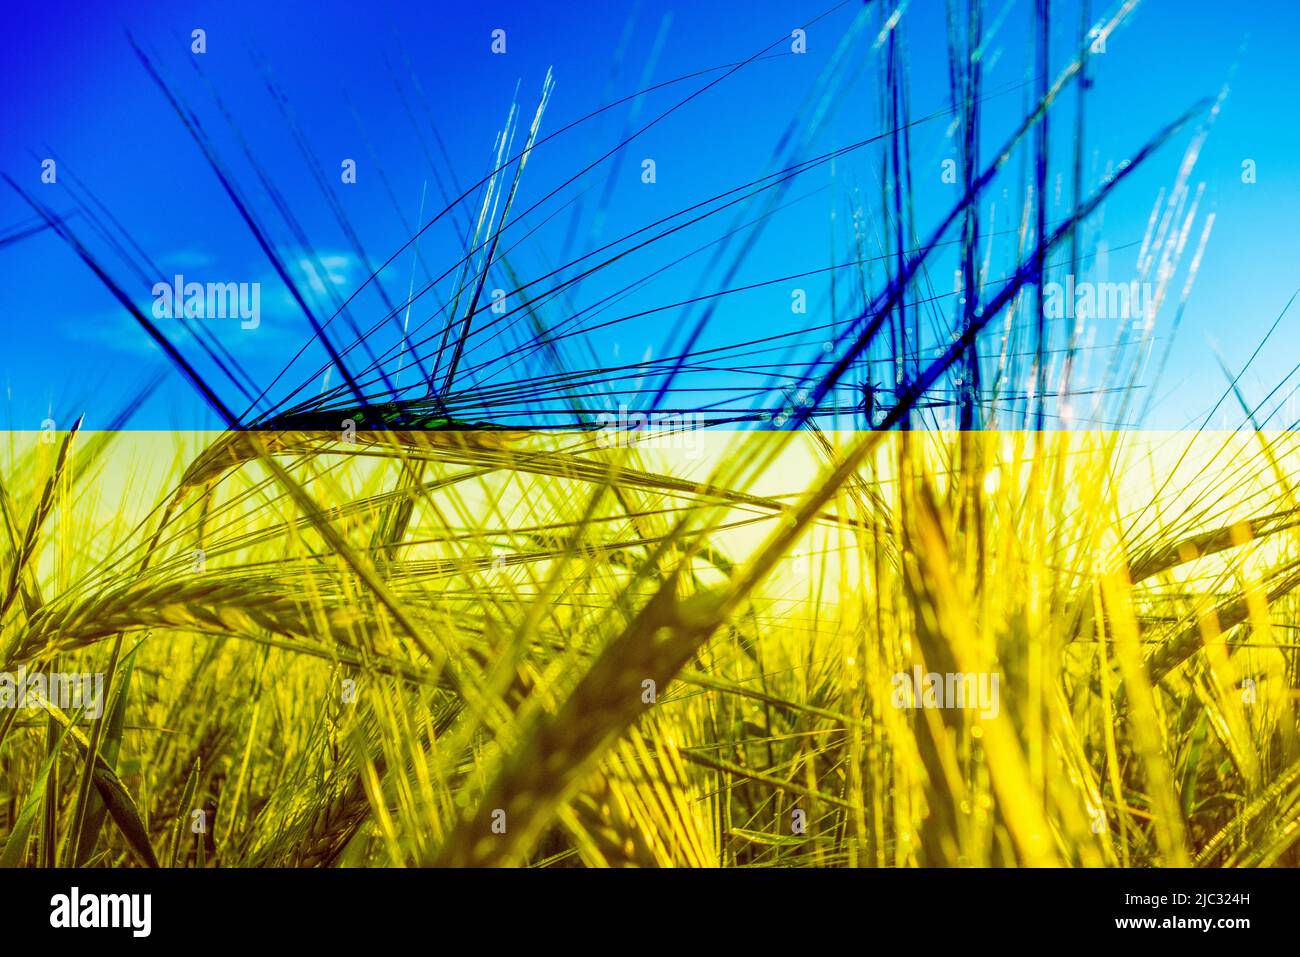 Flag of Ukraine and wheat field composite. Concept image: Ukraine Russia conflict, war, wheat, world food shortage, Russian sanctions... Stock Photo